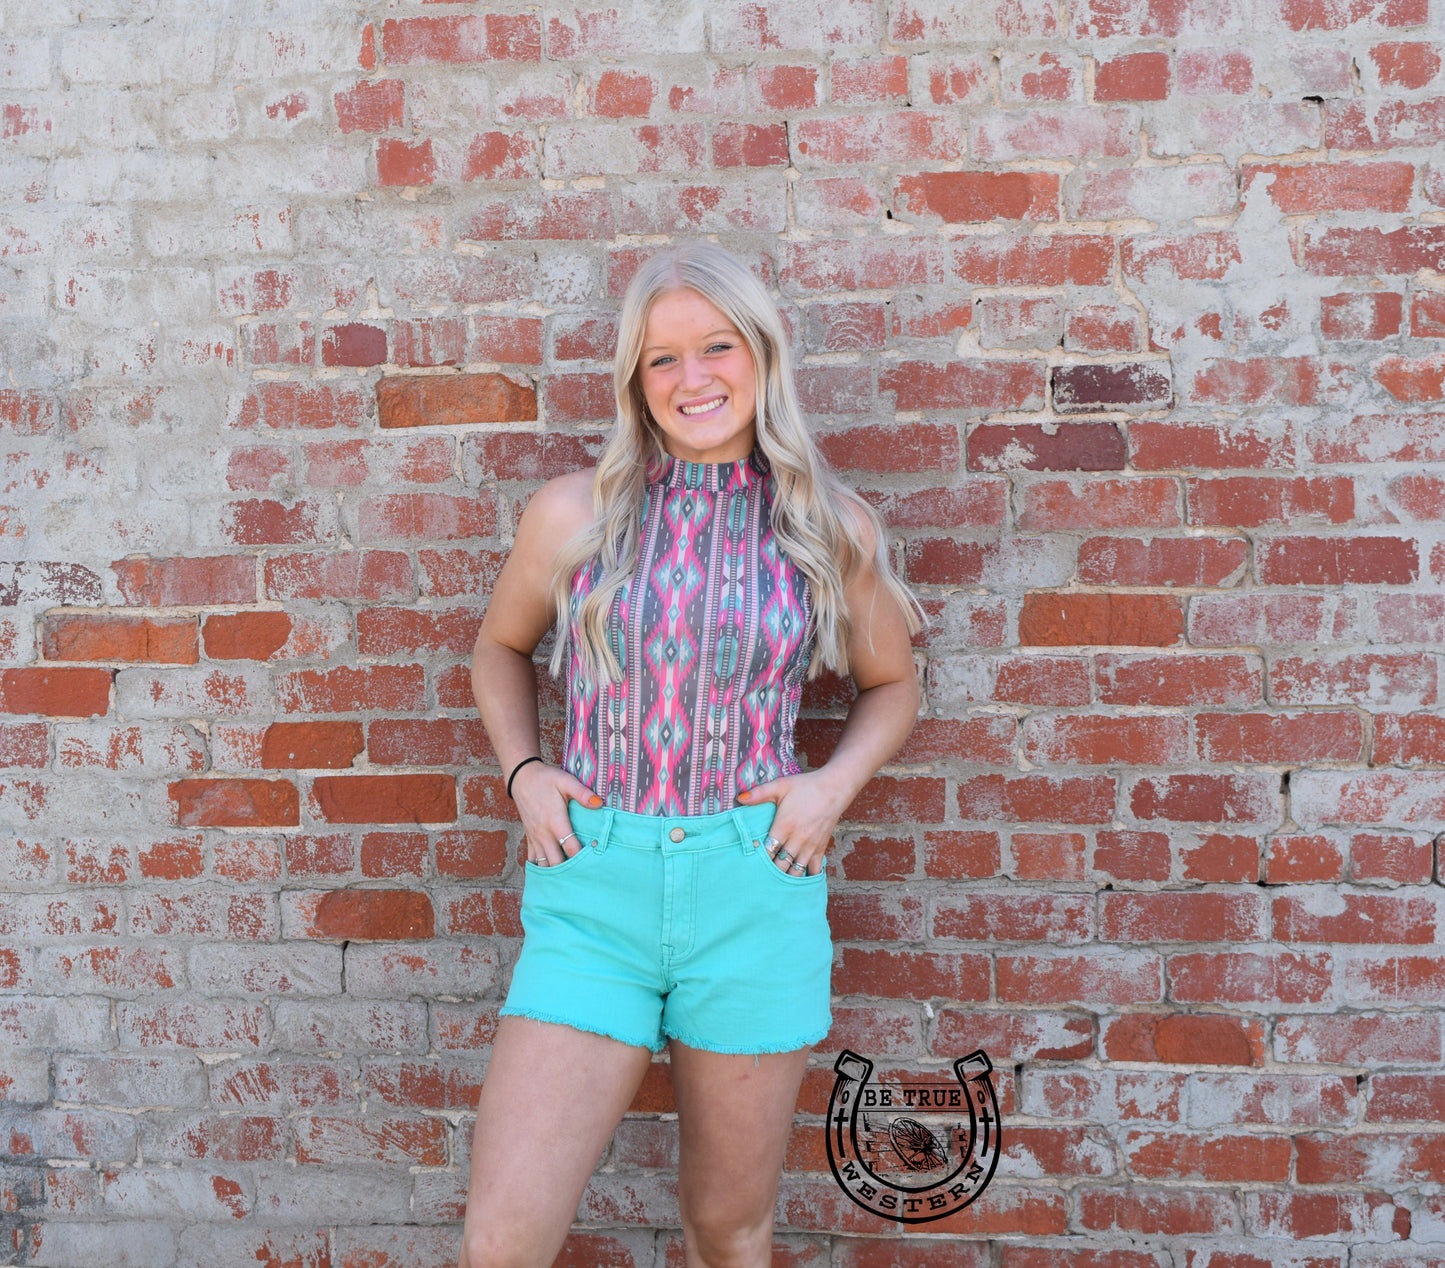 The Turquoise Summer Nights Shorts